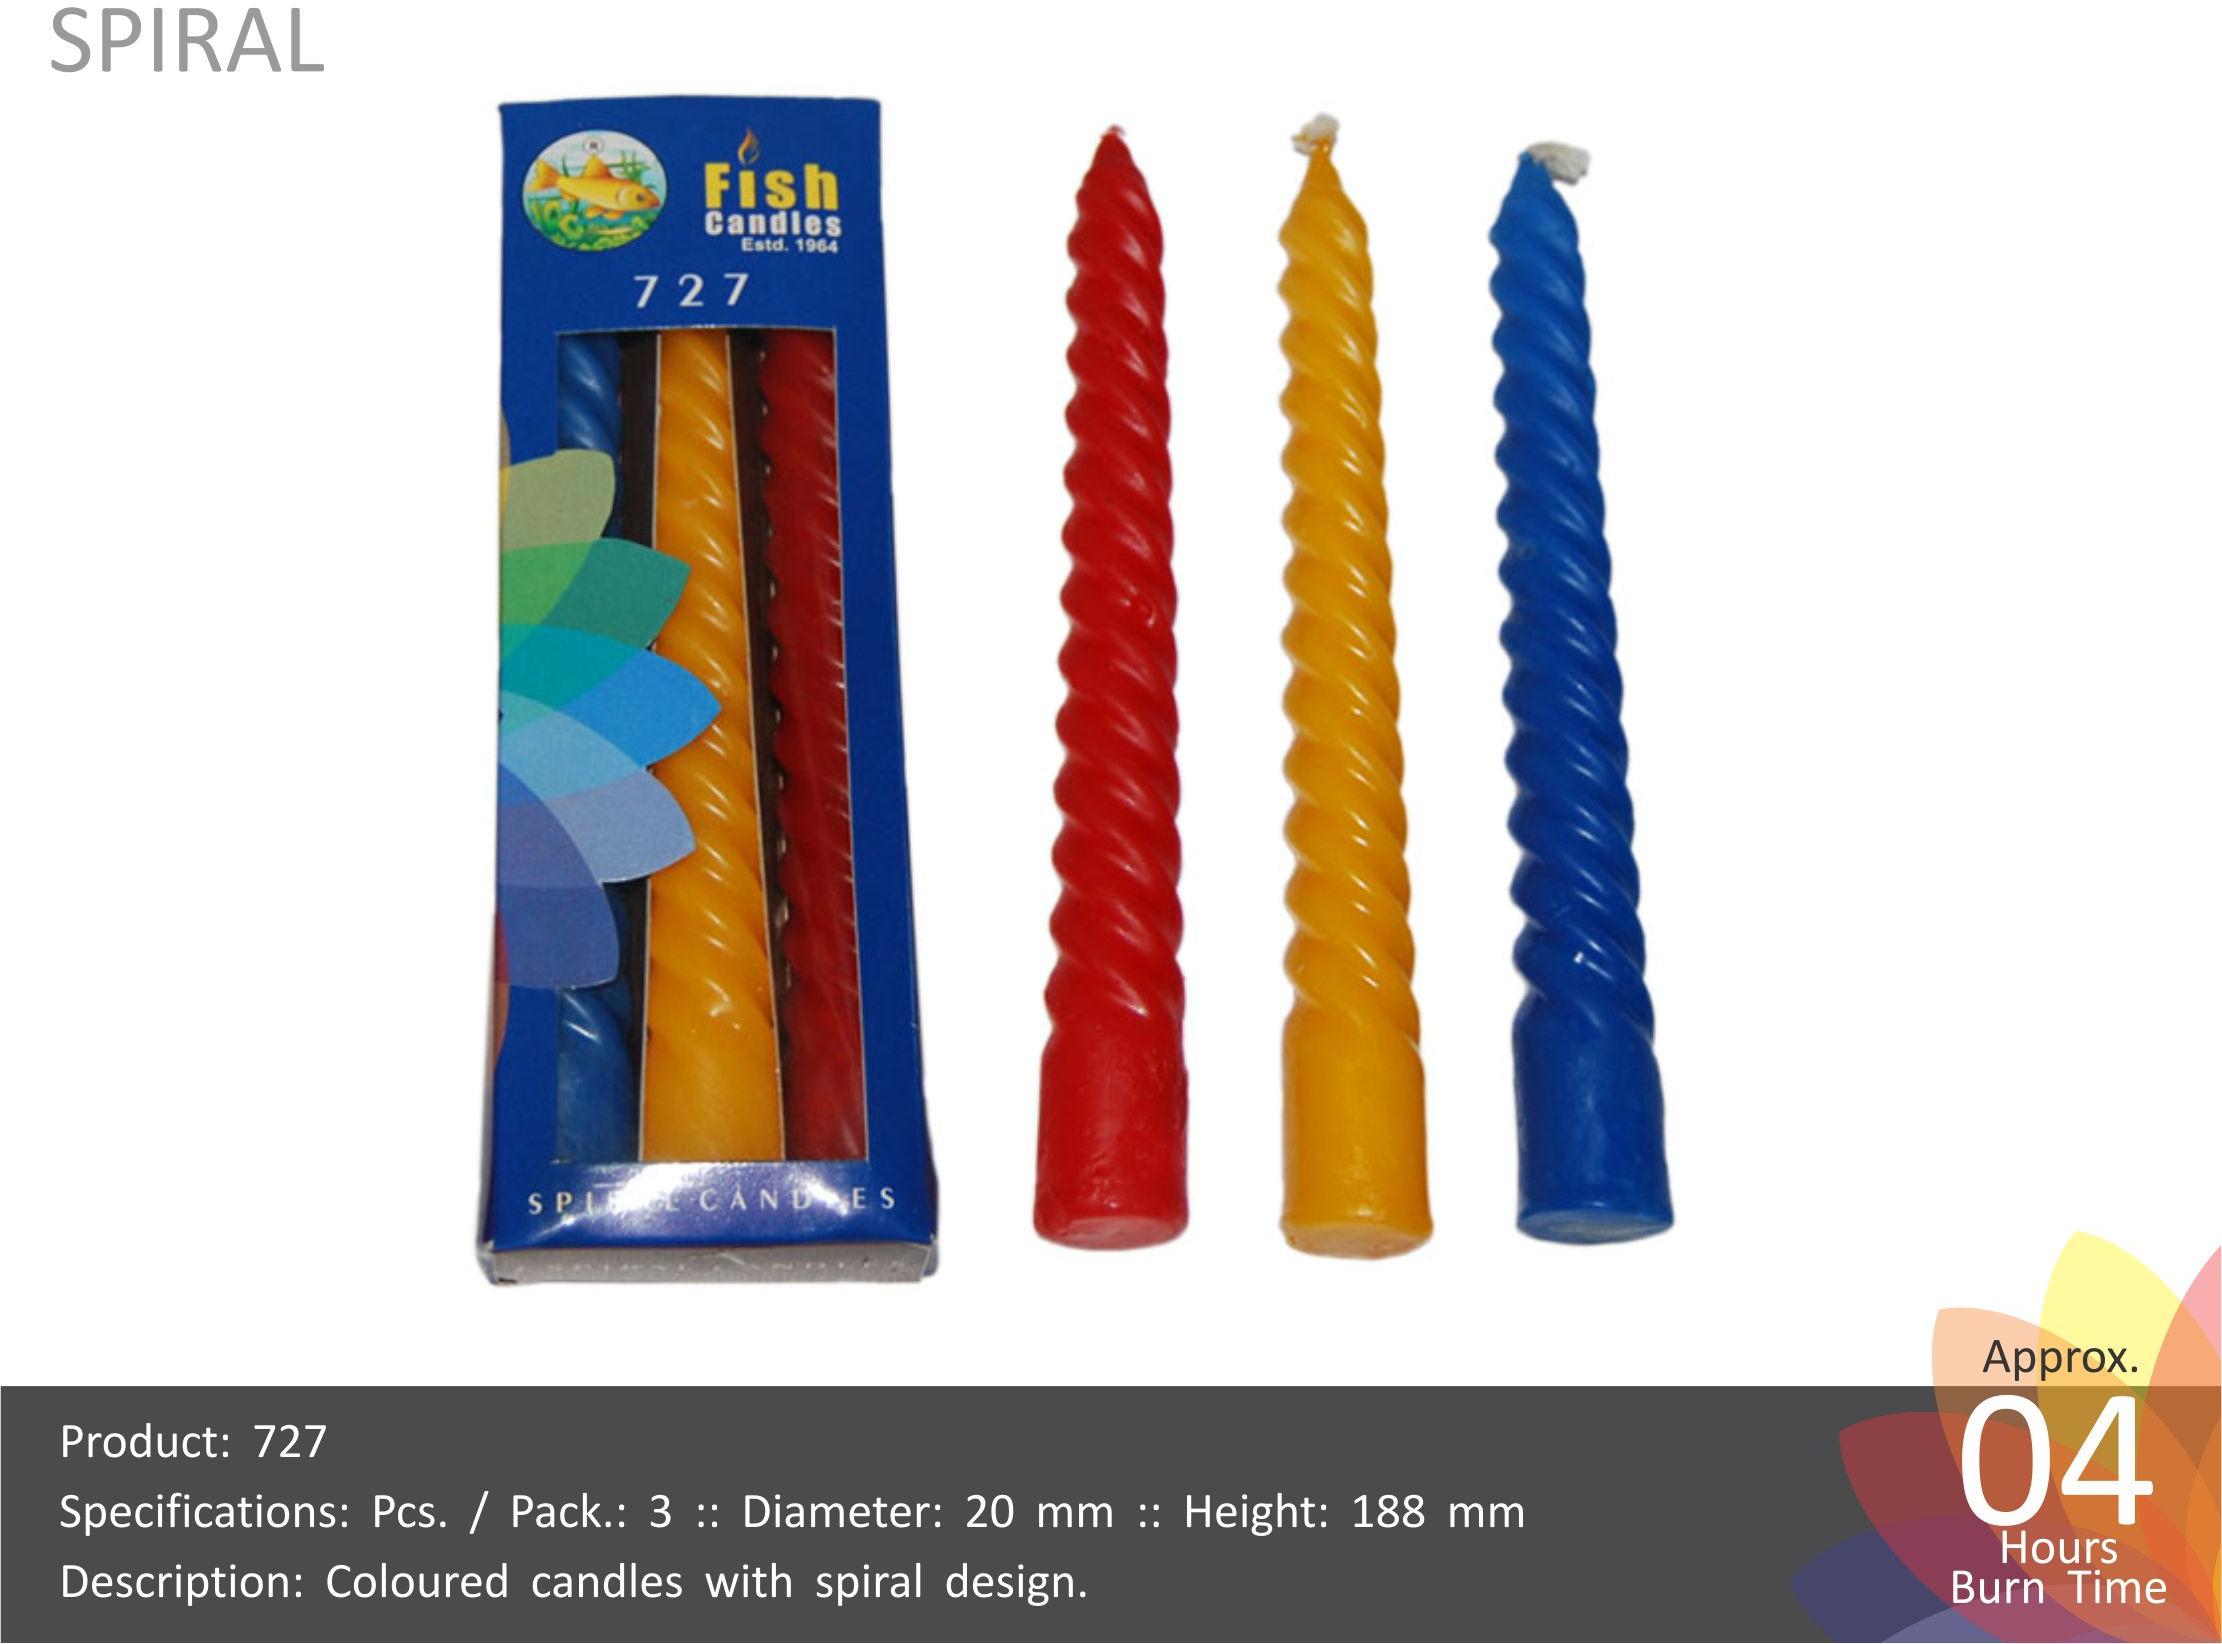 Round Paraffin Wax 727 Spiral Candle, Color : Multi